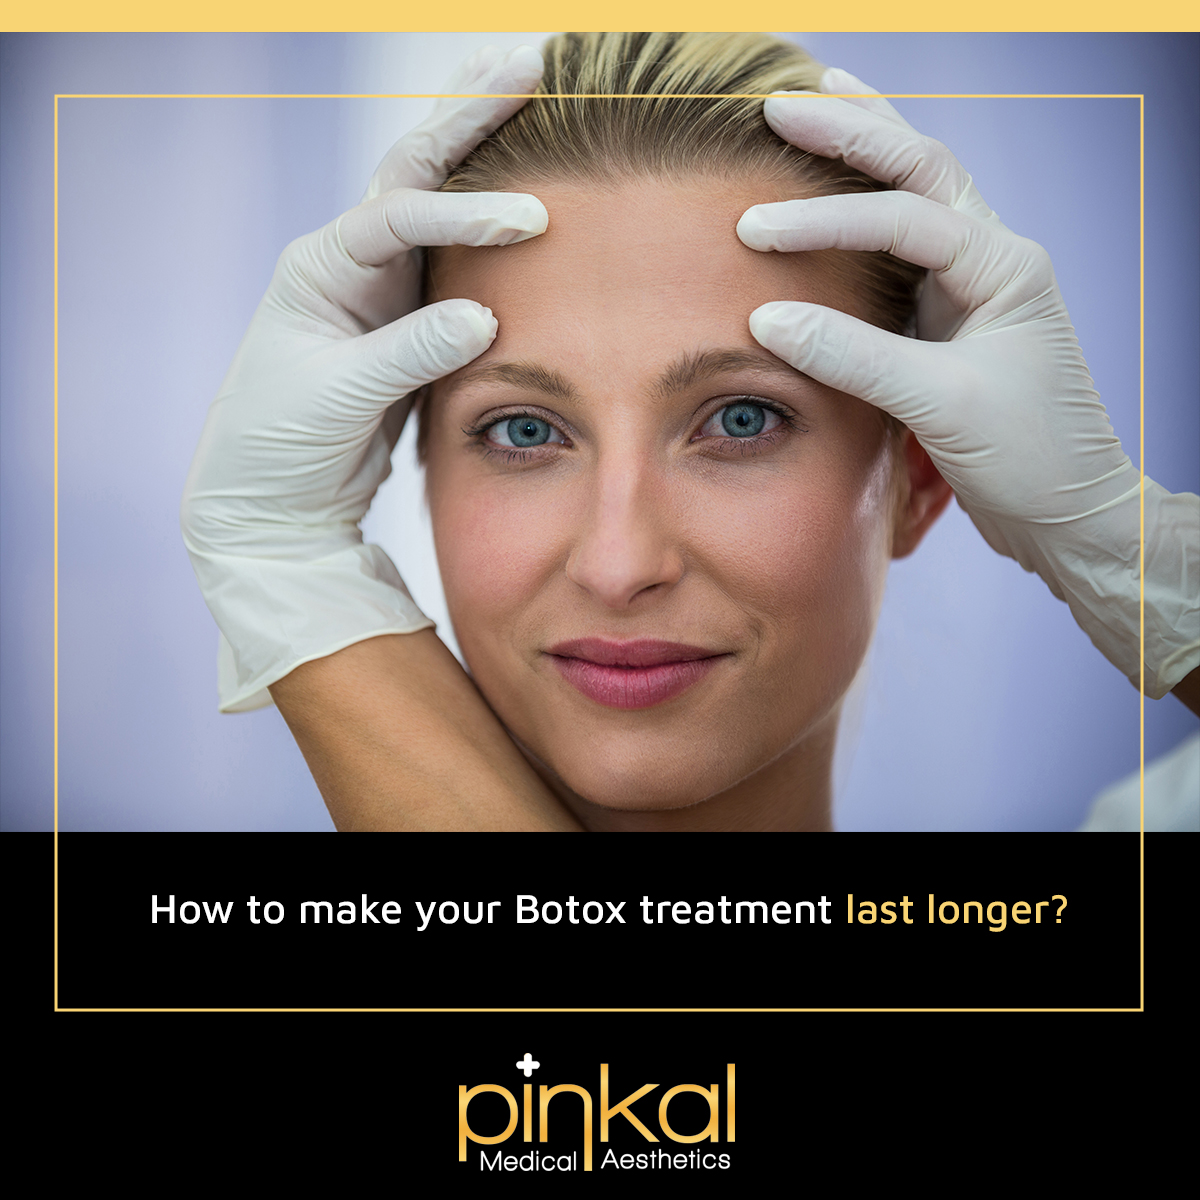 How to make your Botox treatment last longer